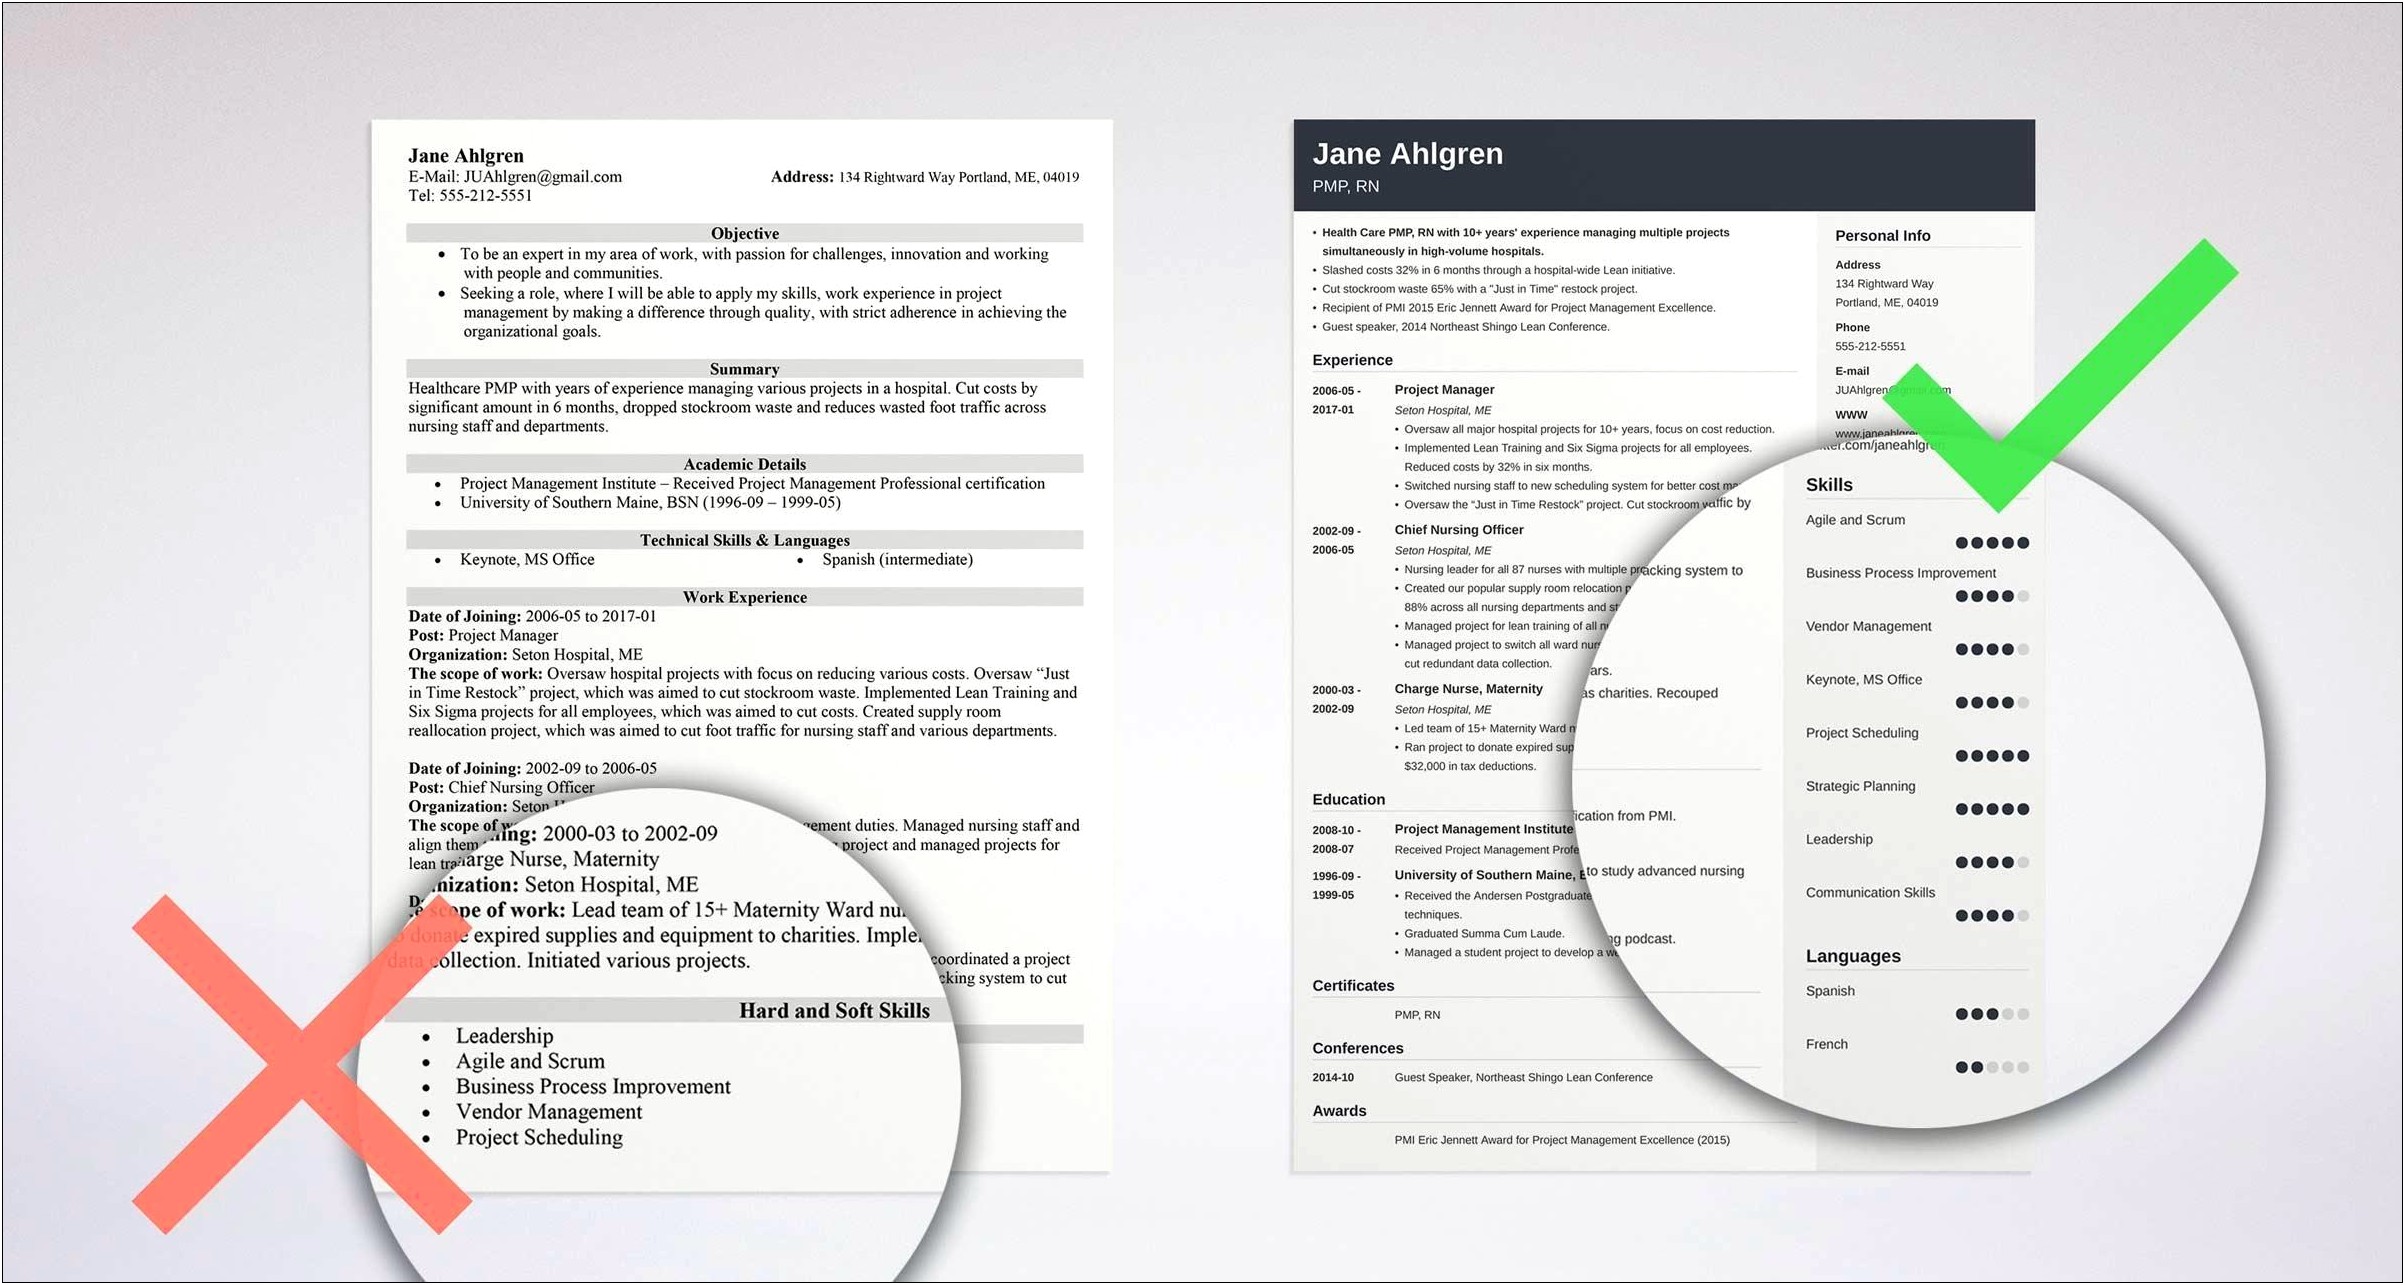 Skills And Abilities Categories For Resume